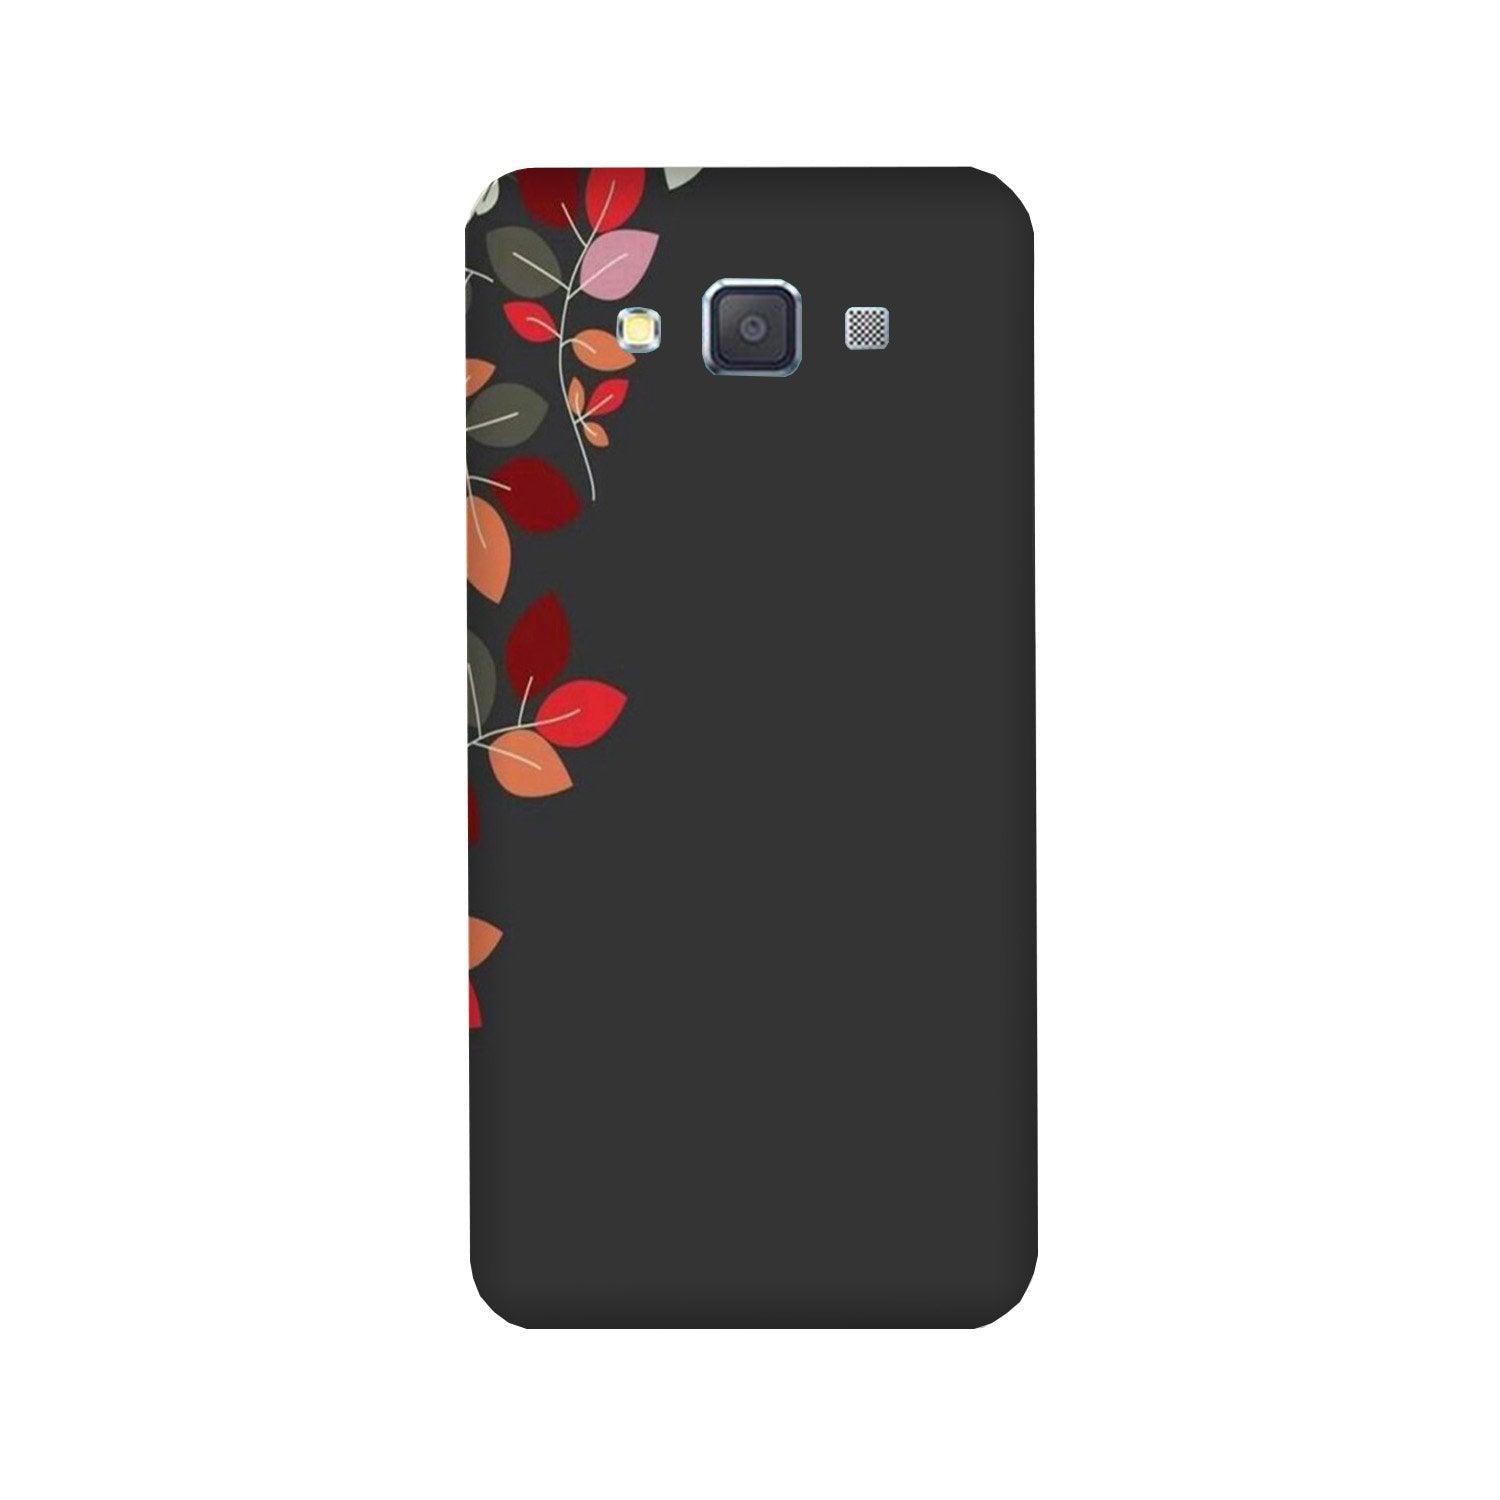 Grey Background Case for Galaxy A5 (2015)